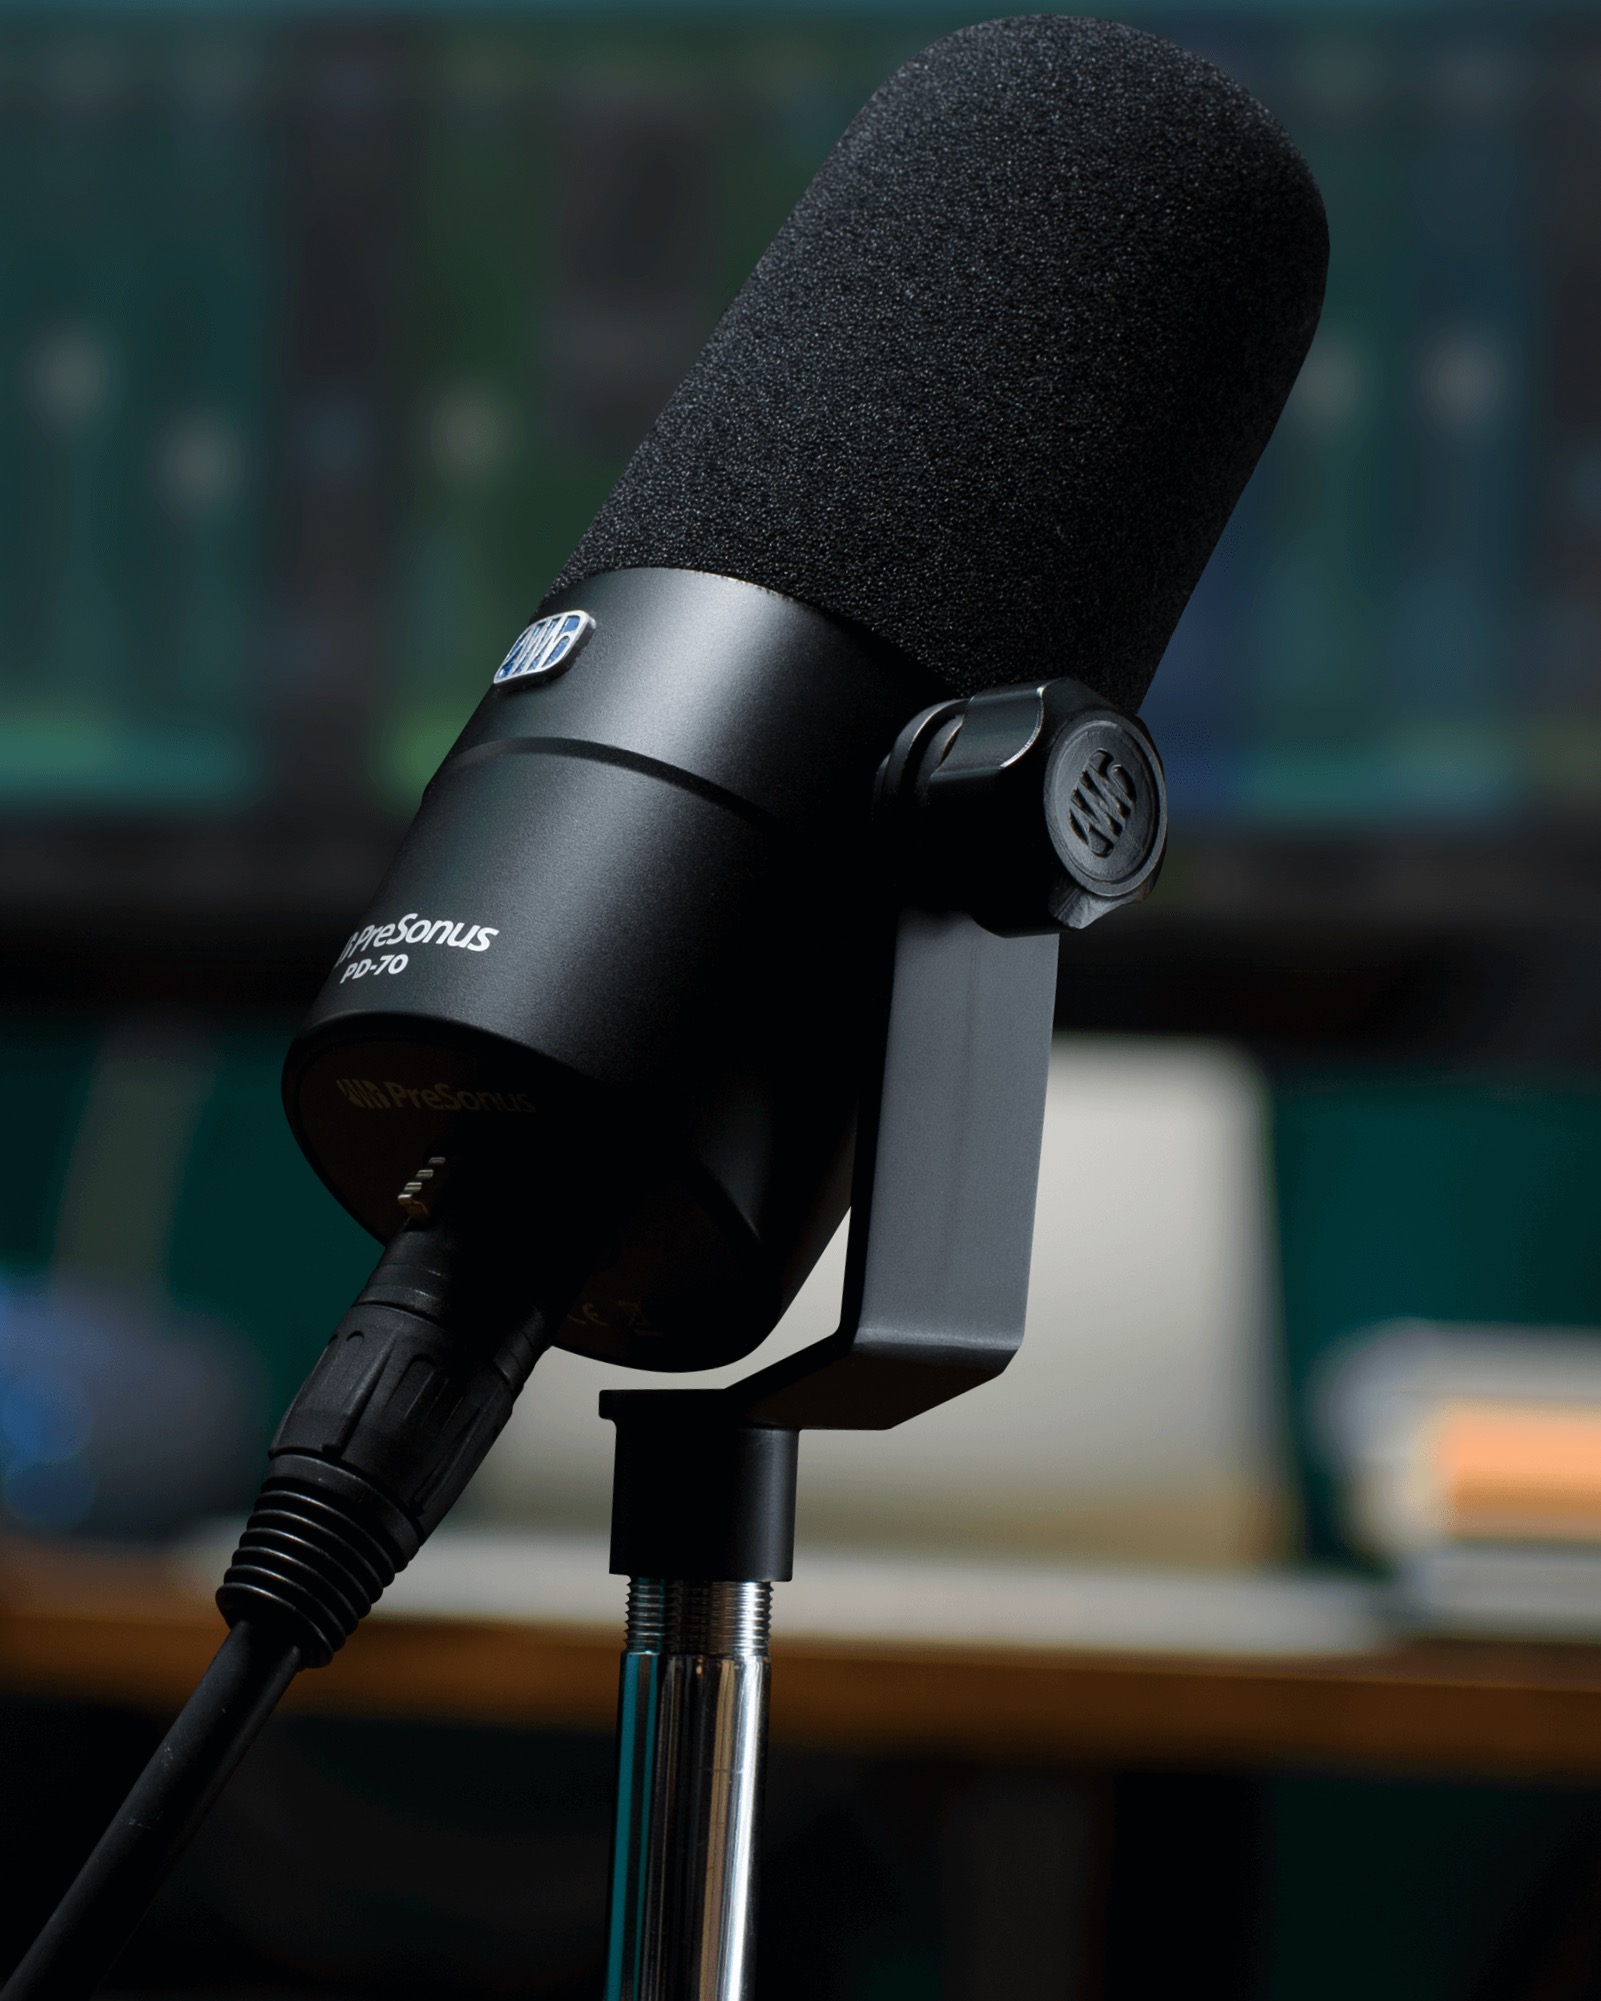 PreSonus PD-70 Is Designed For Podcasters And Live Streamers